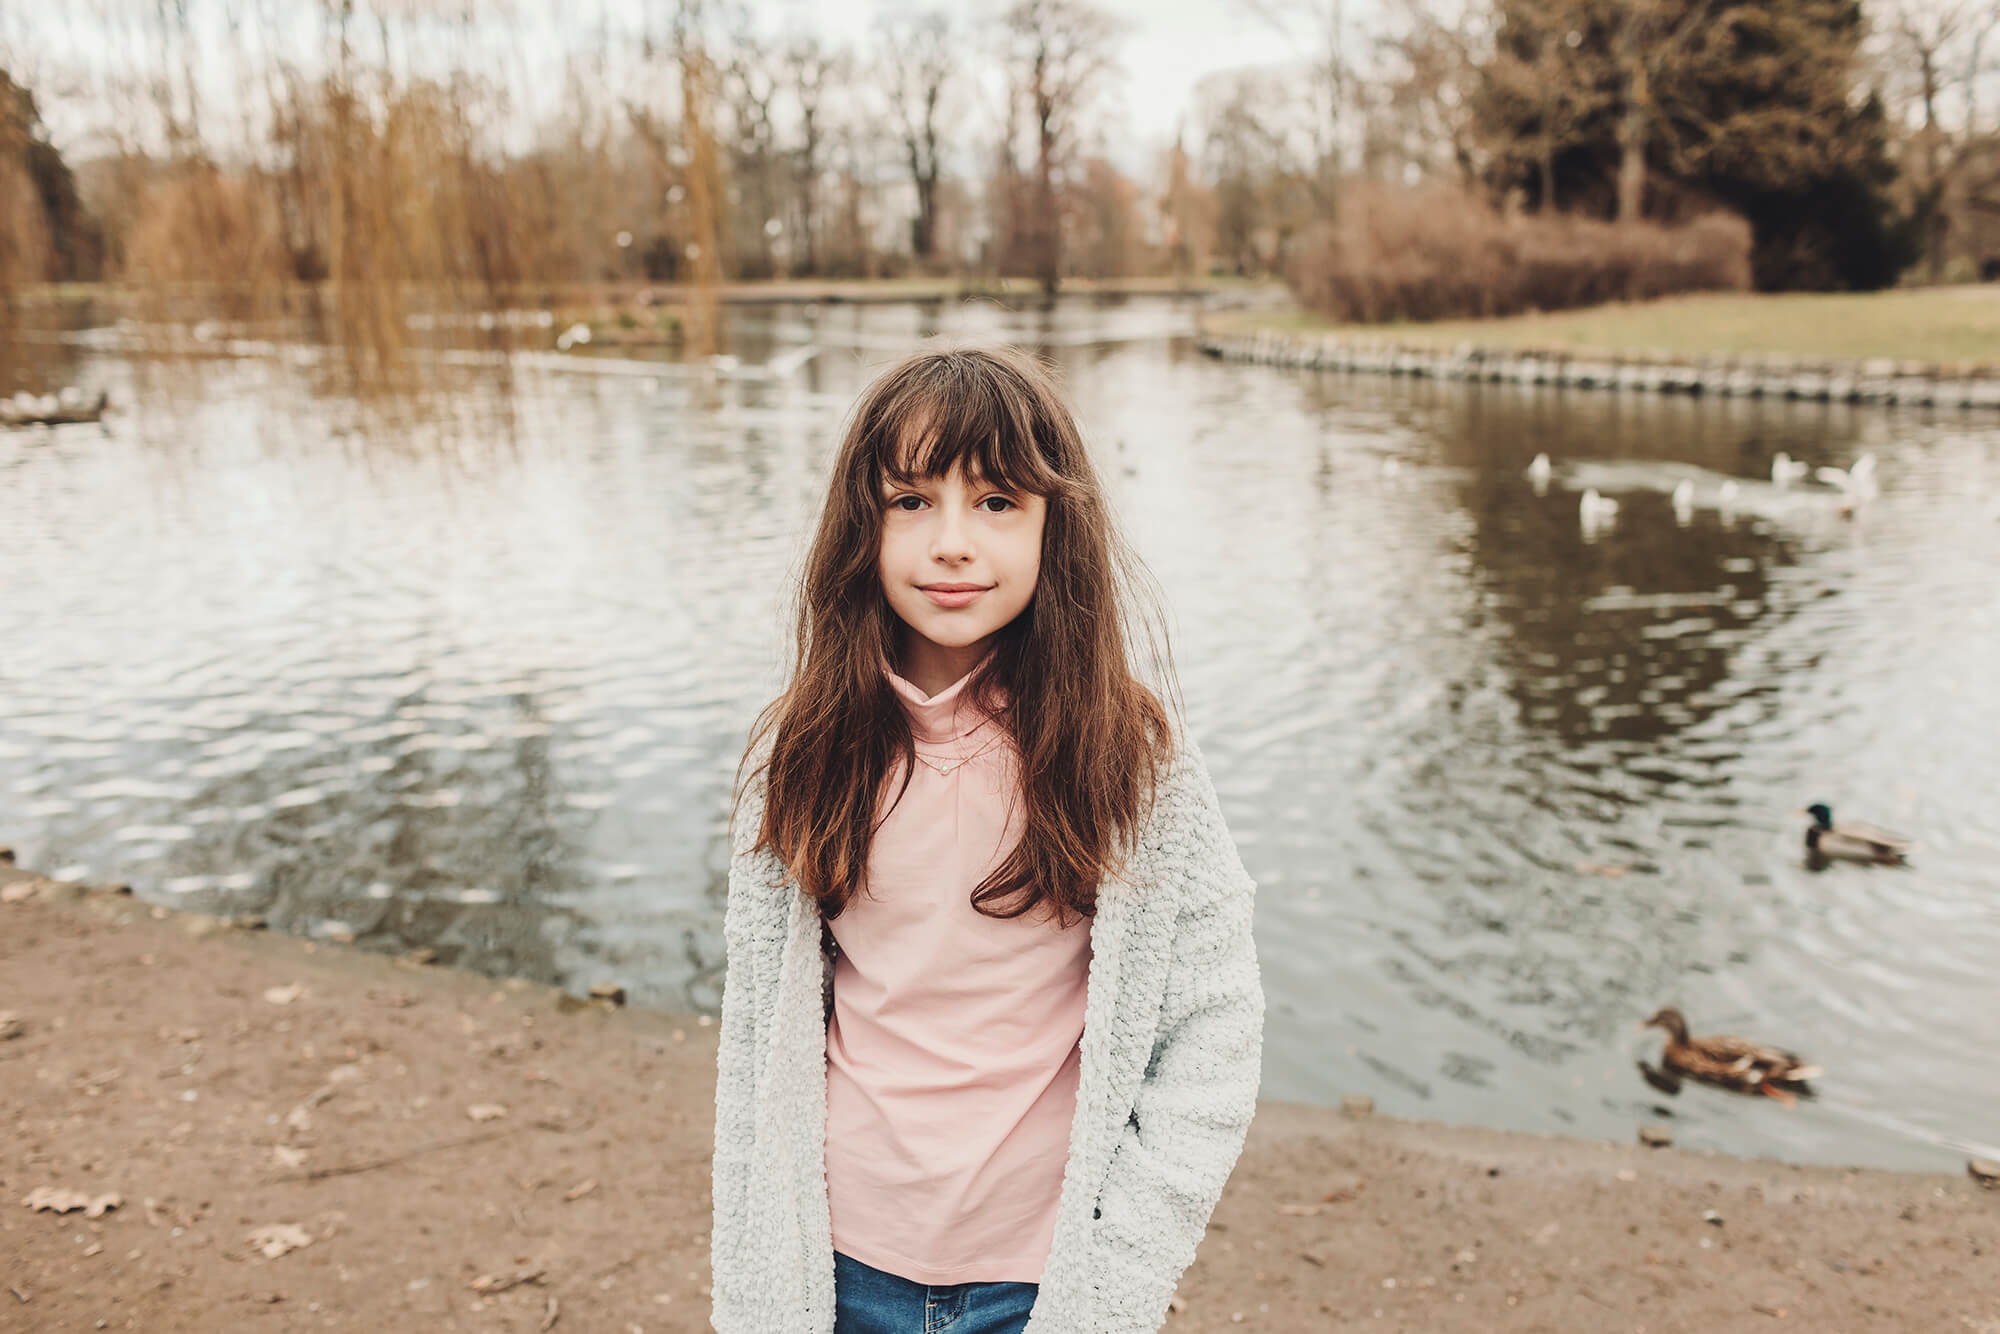 The Castelli daughter by the Biebrich park lake during a family photo session in Wiesbaden